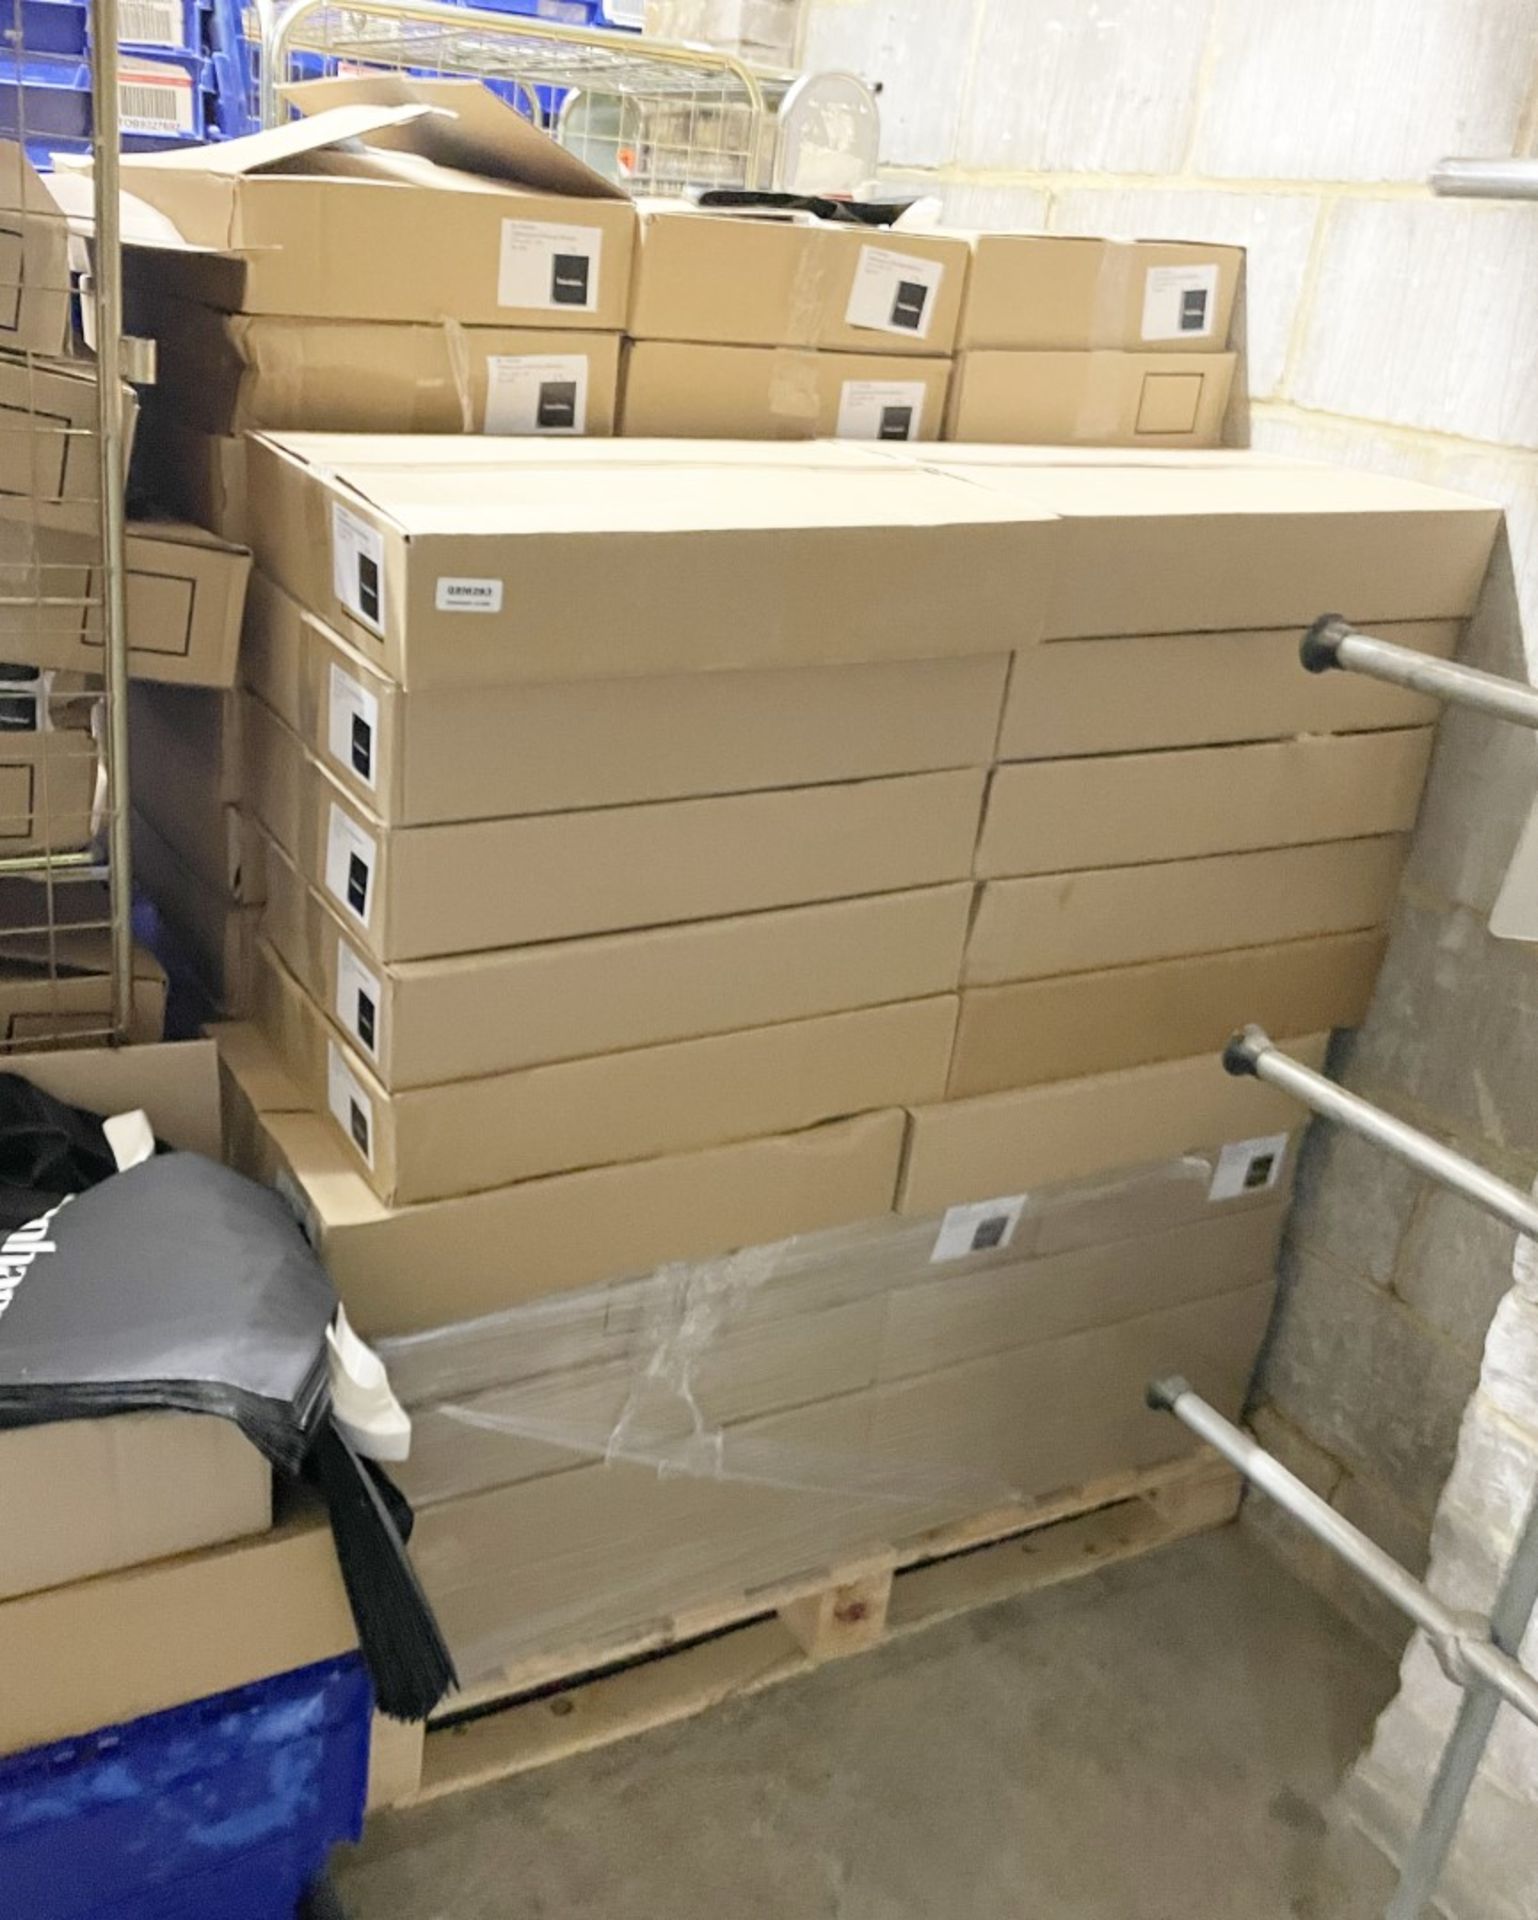 40 x Boxes of Debenhams High Quality Shopping Bags - Brand New Boxes - CL670 - Ref: GEM283A - - Image 2 of 3